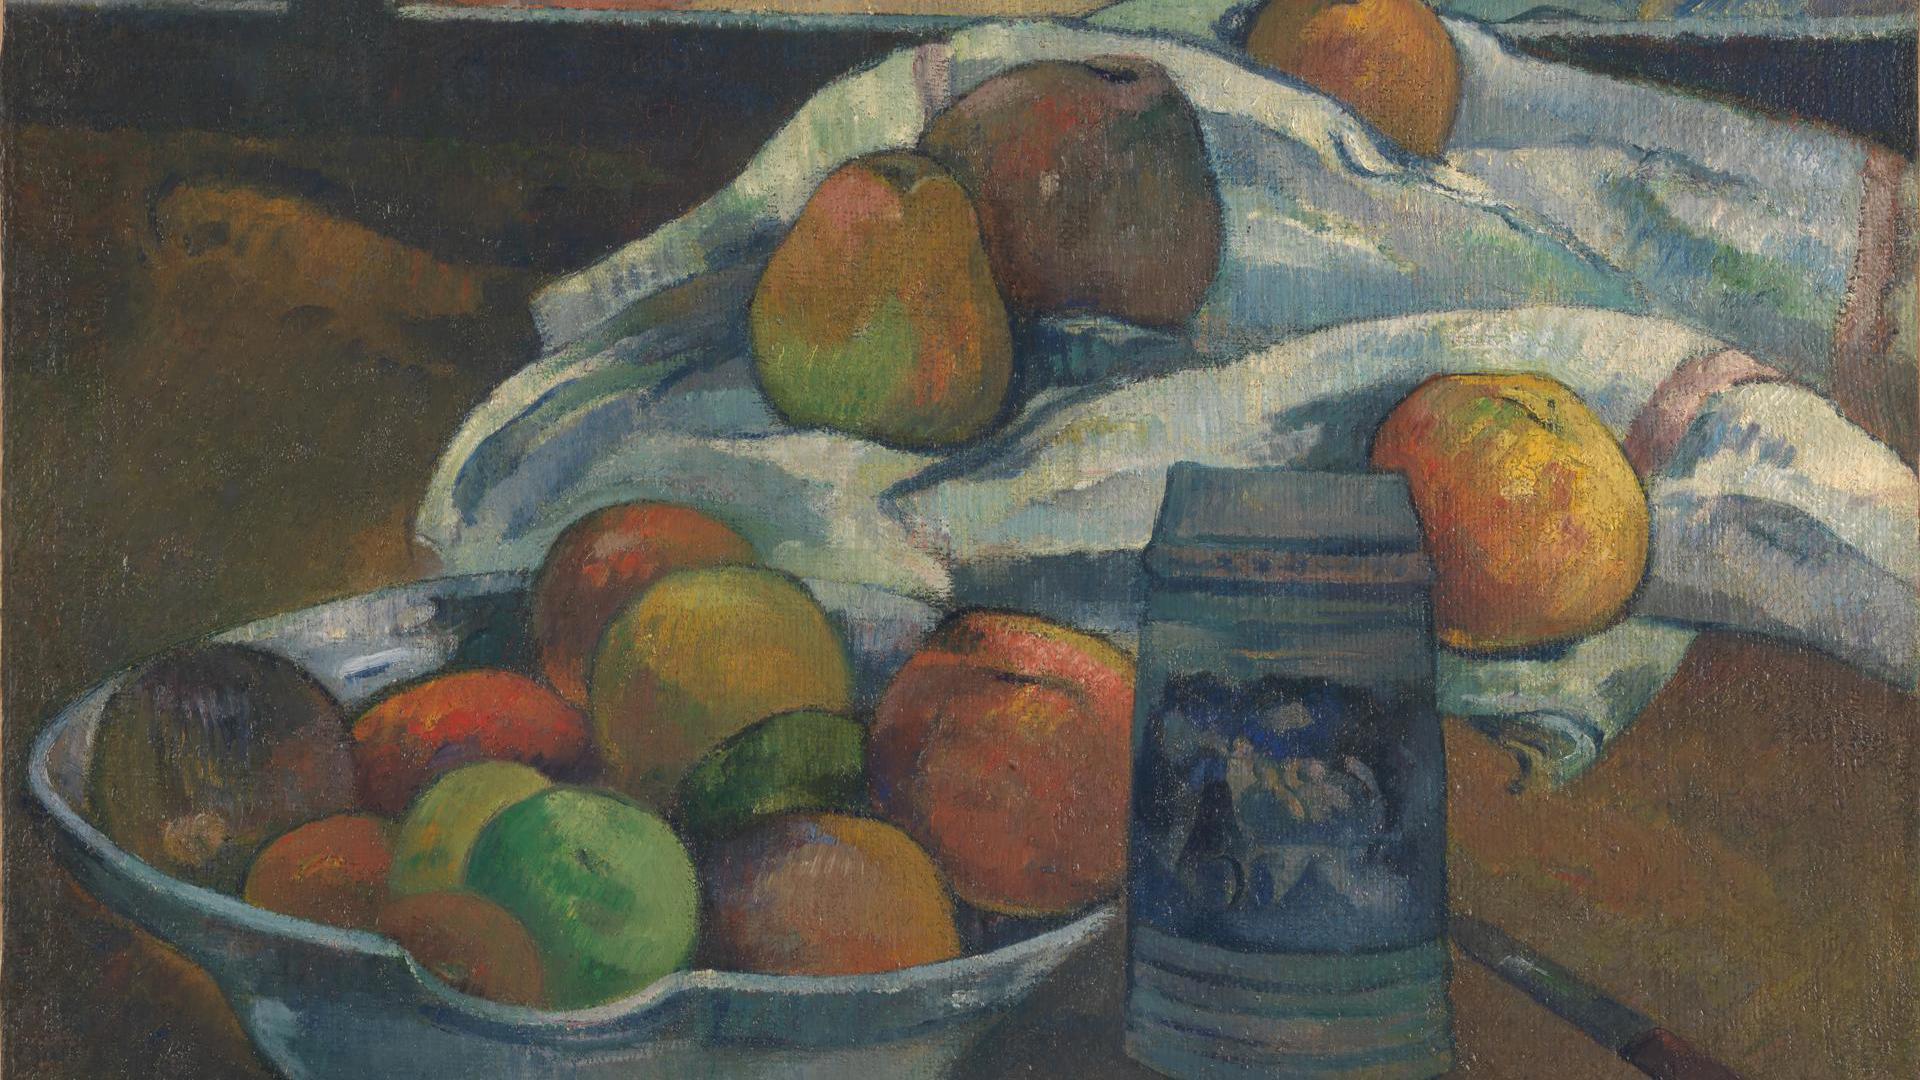 Bowl of Fruit and Tankard before a Window by Paul Gauguin